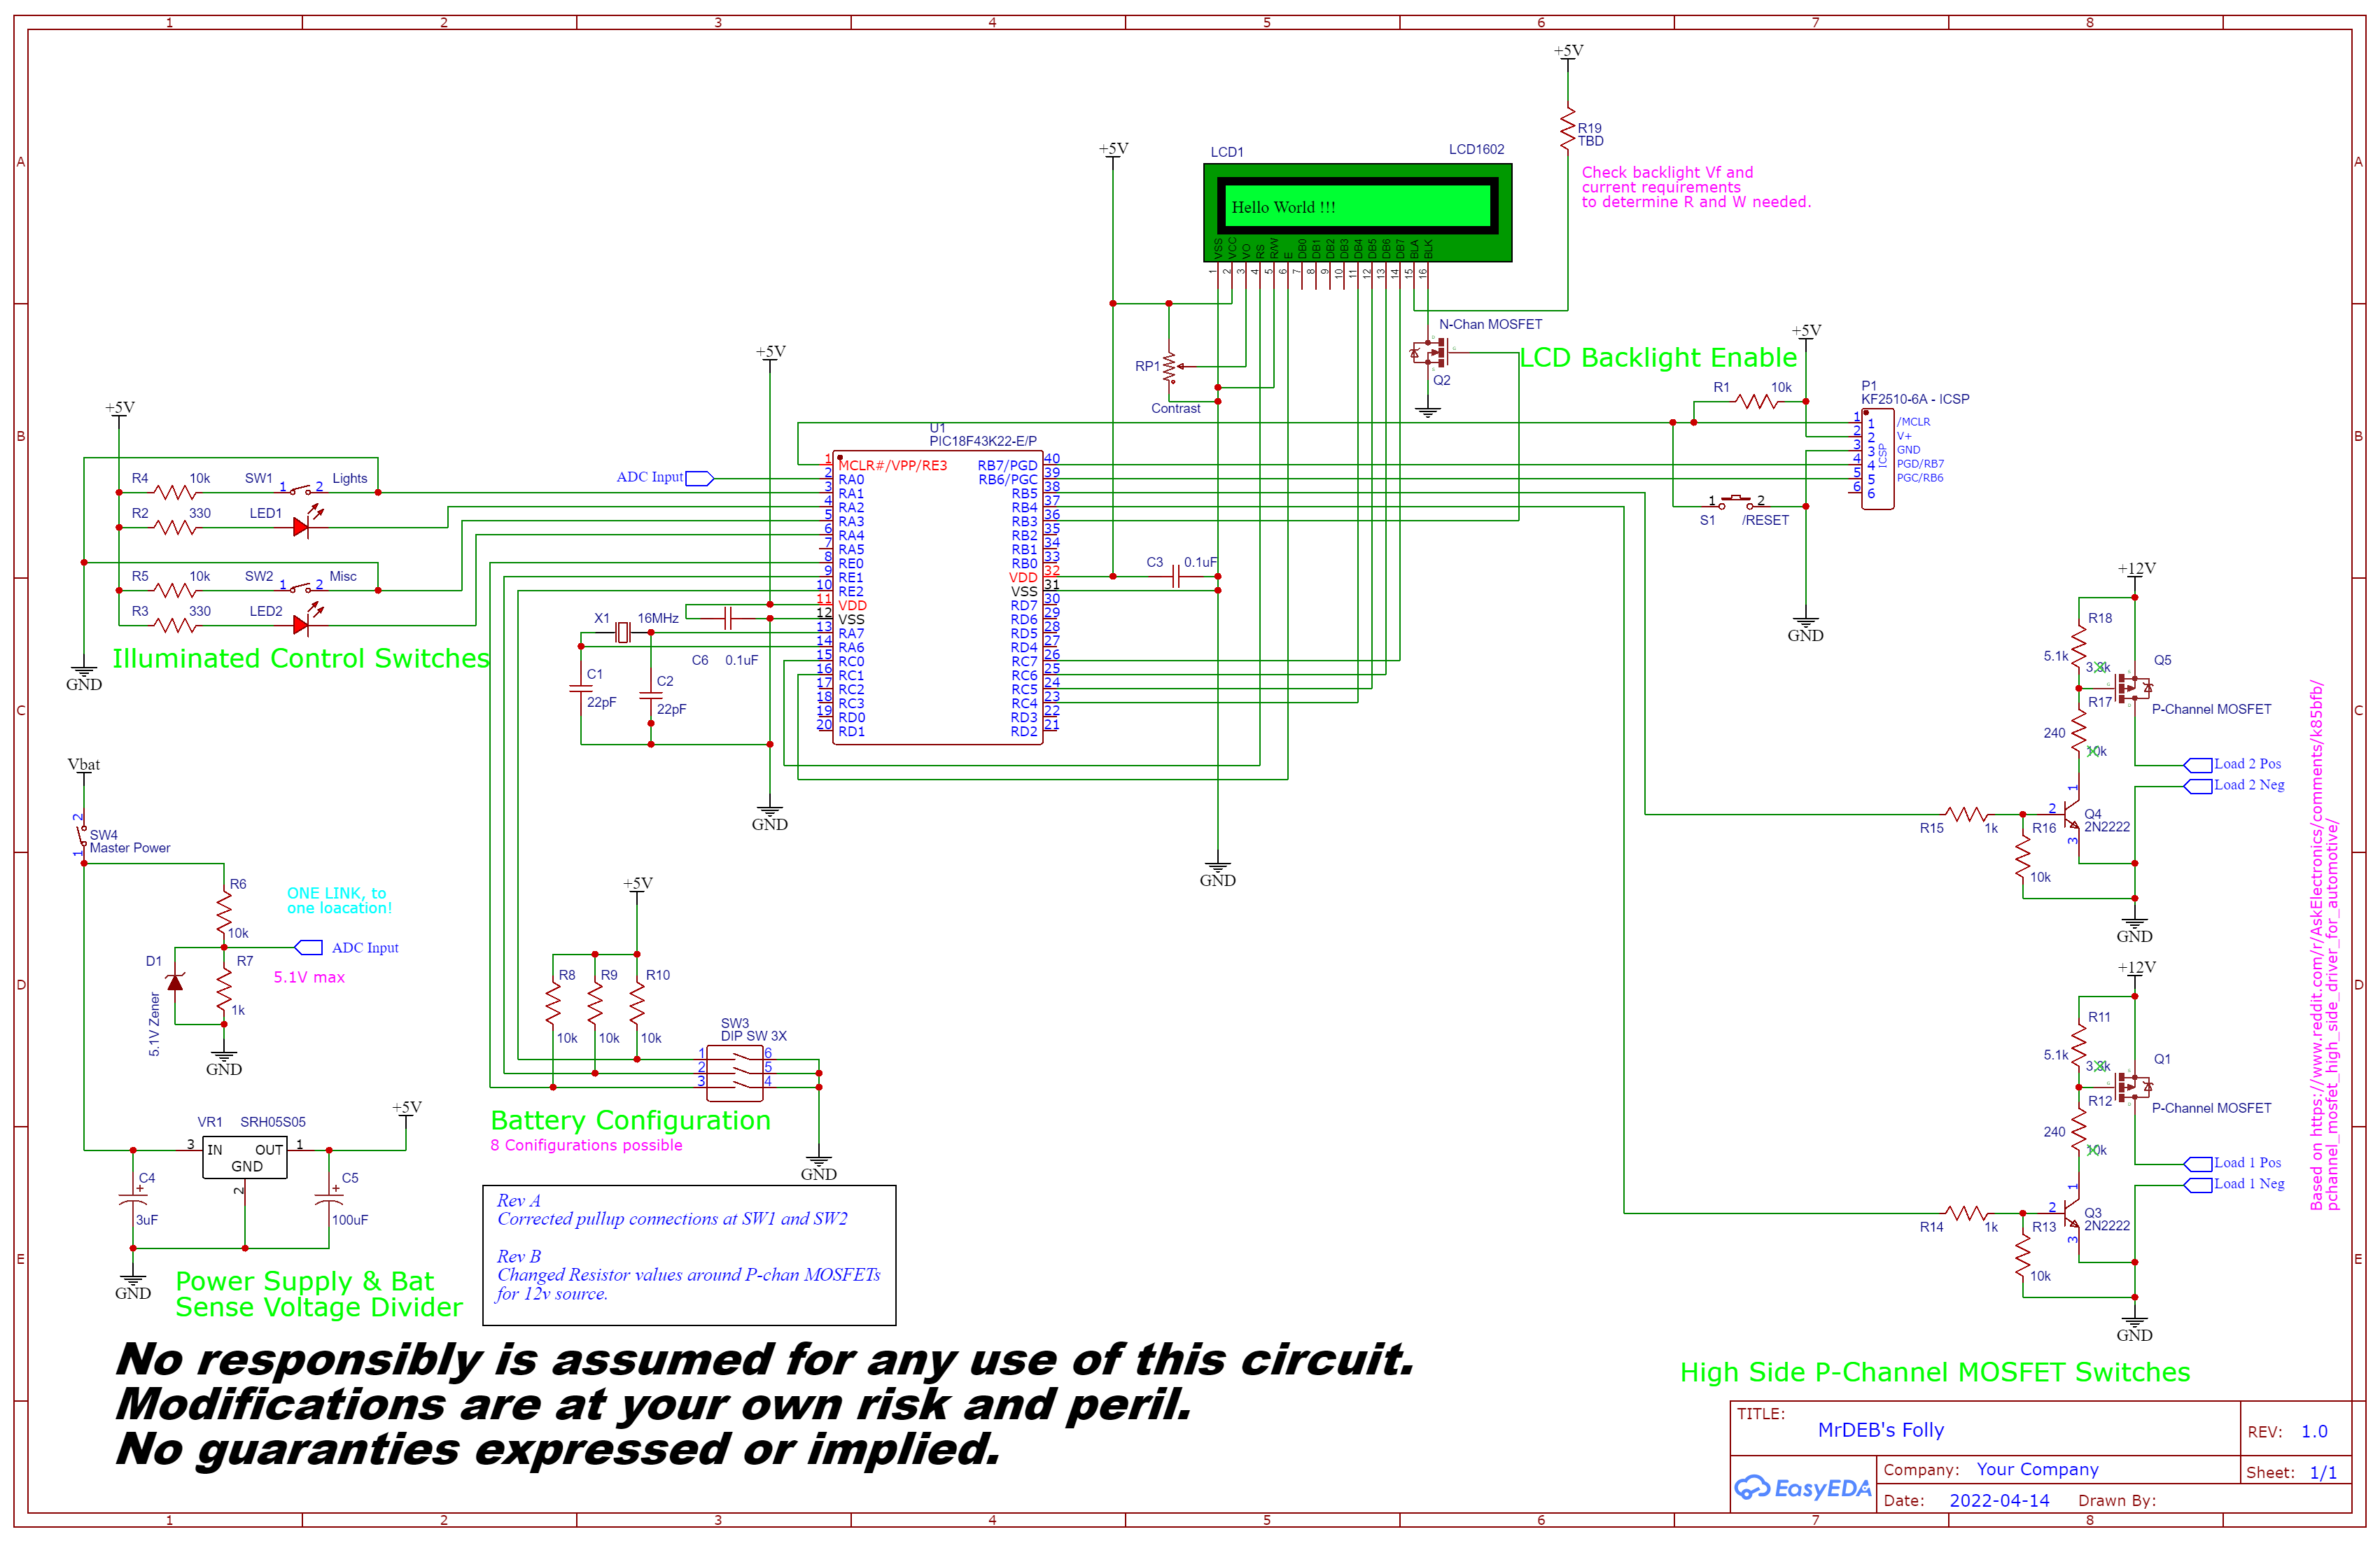 Schematic_another deb folly_2022-04-14.png